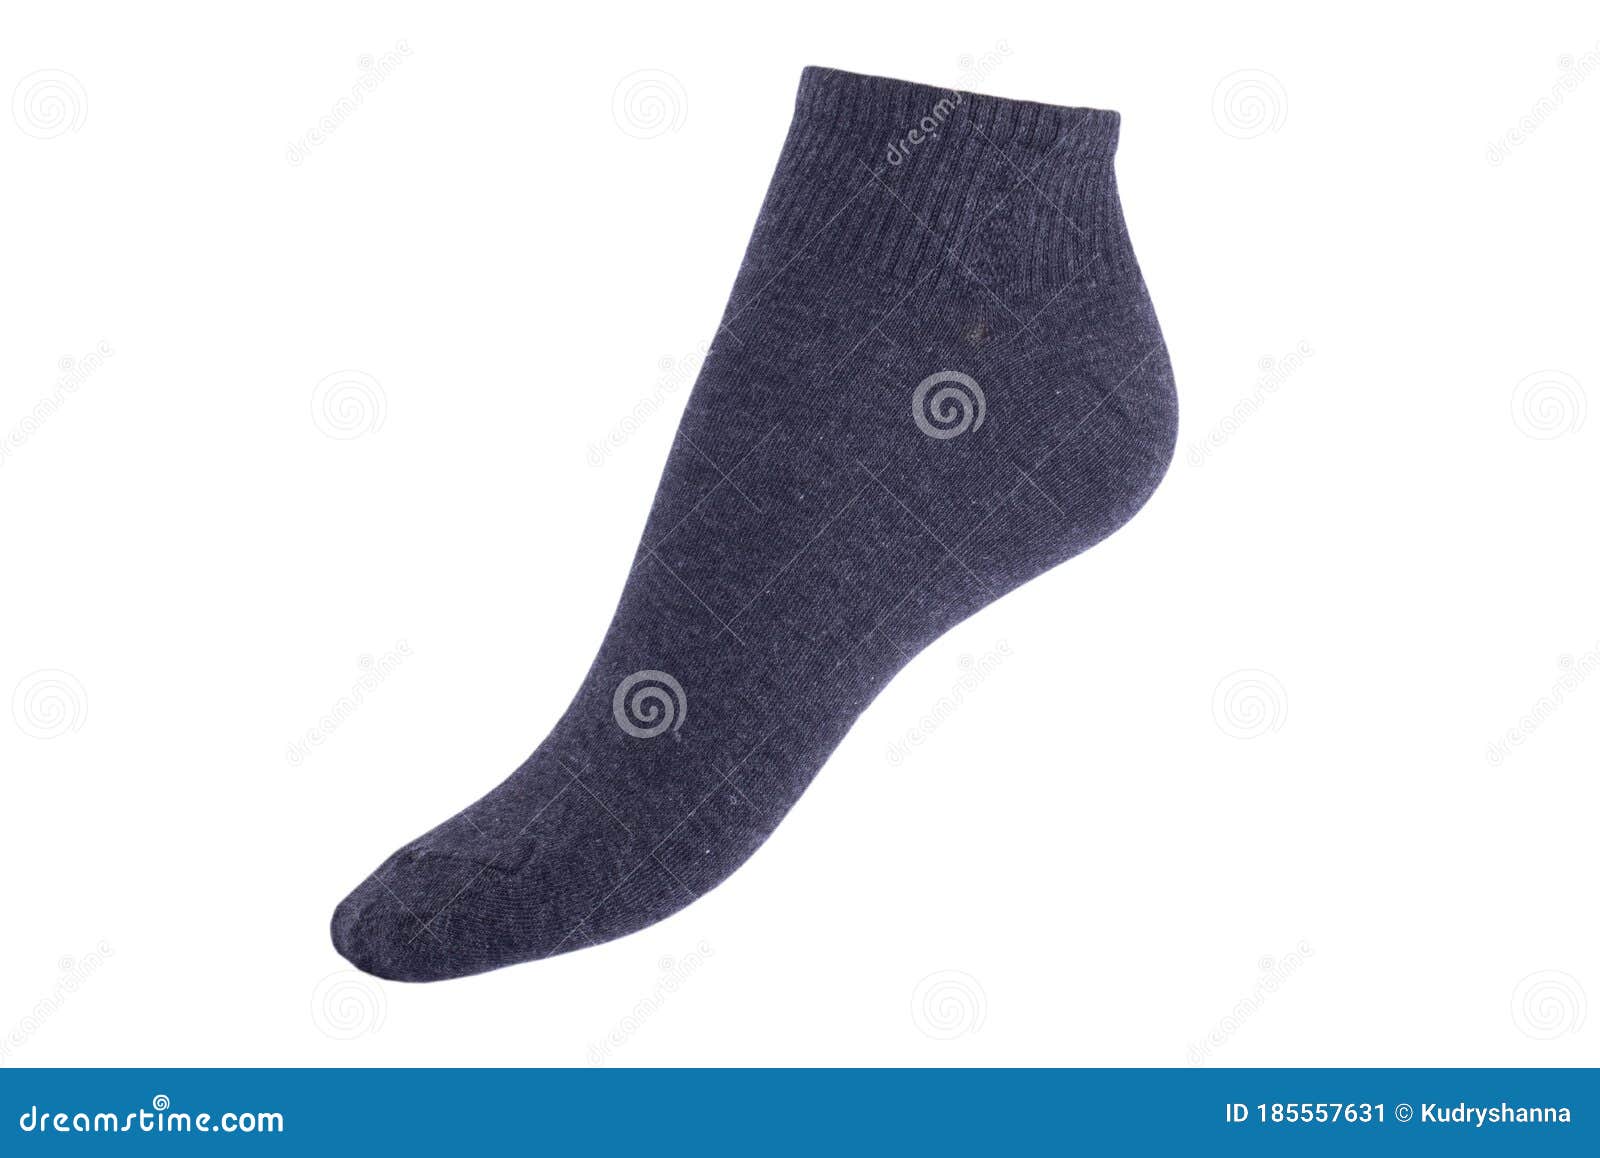 Men`s Socks on the Foot on a White Background Isolated Stock Image ...